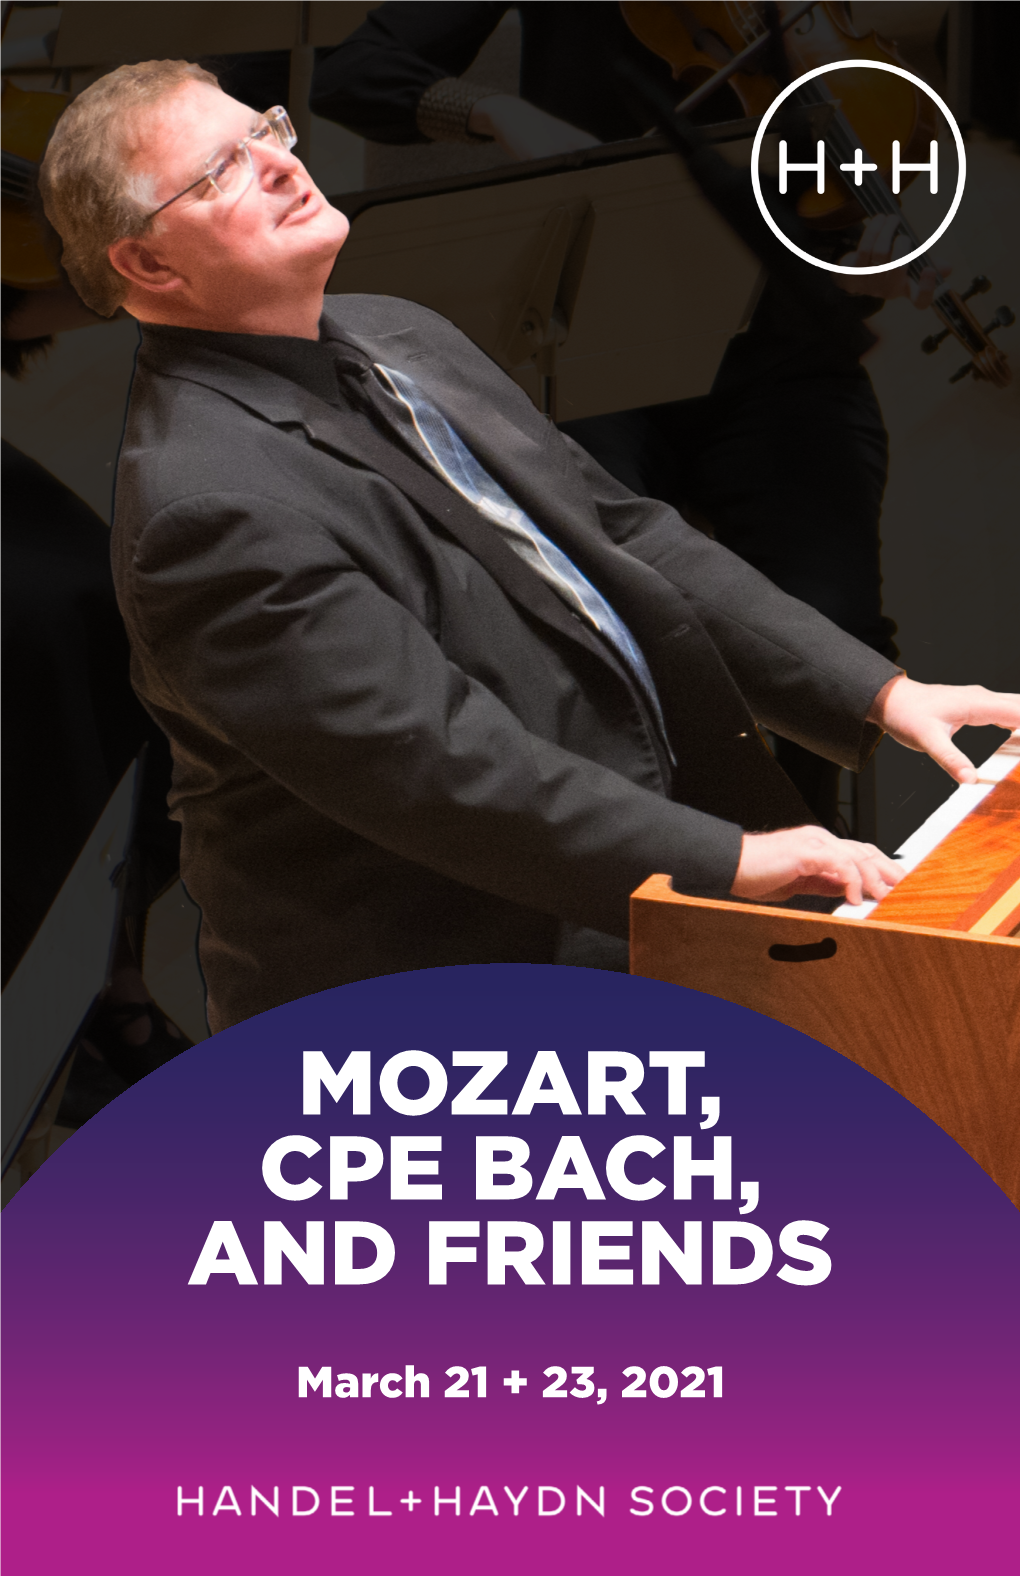 Mozart, Cpe Bach, and Friends